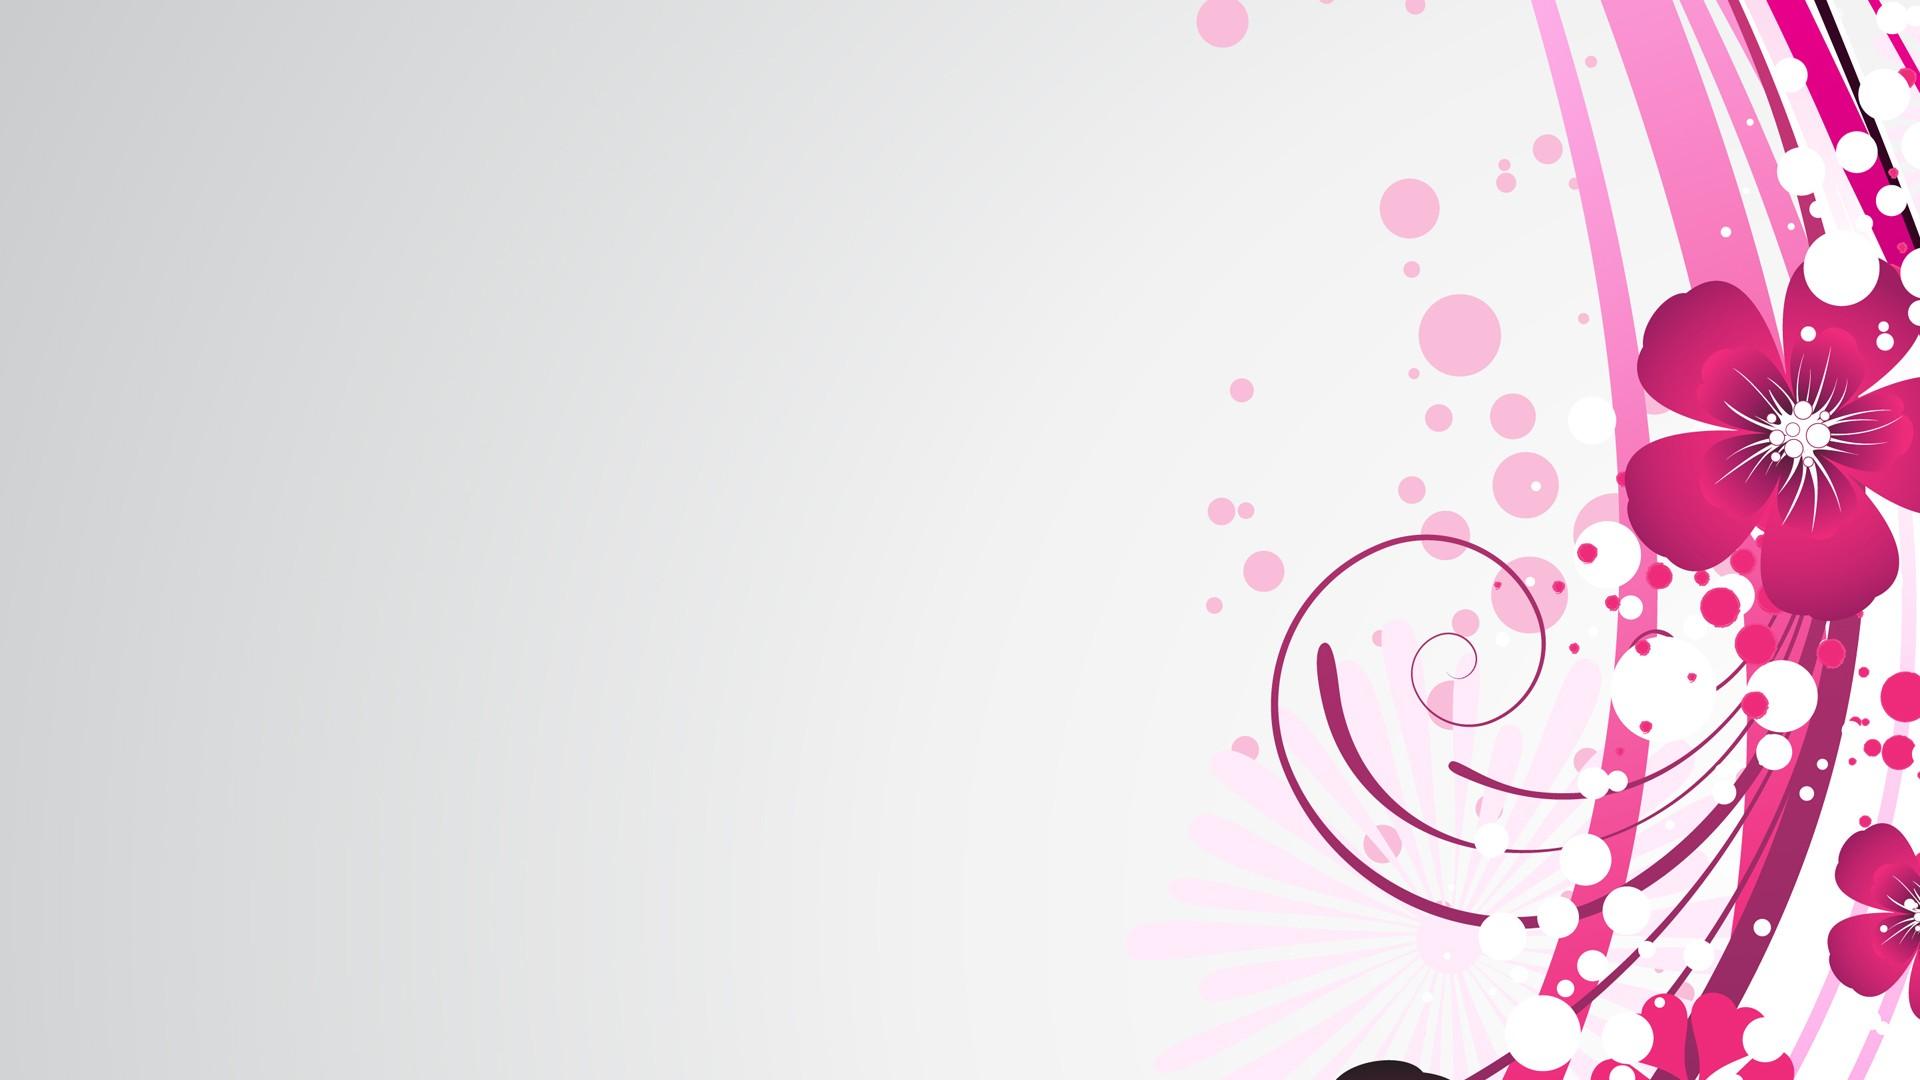 1920x1080 abstract vector floral pink wallpaper